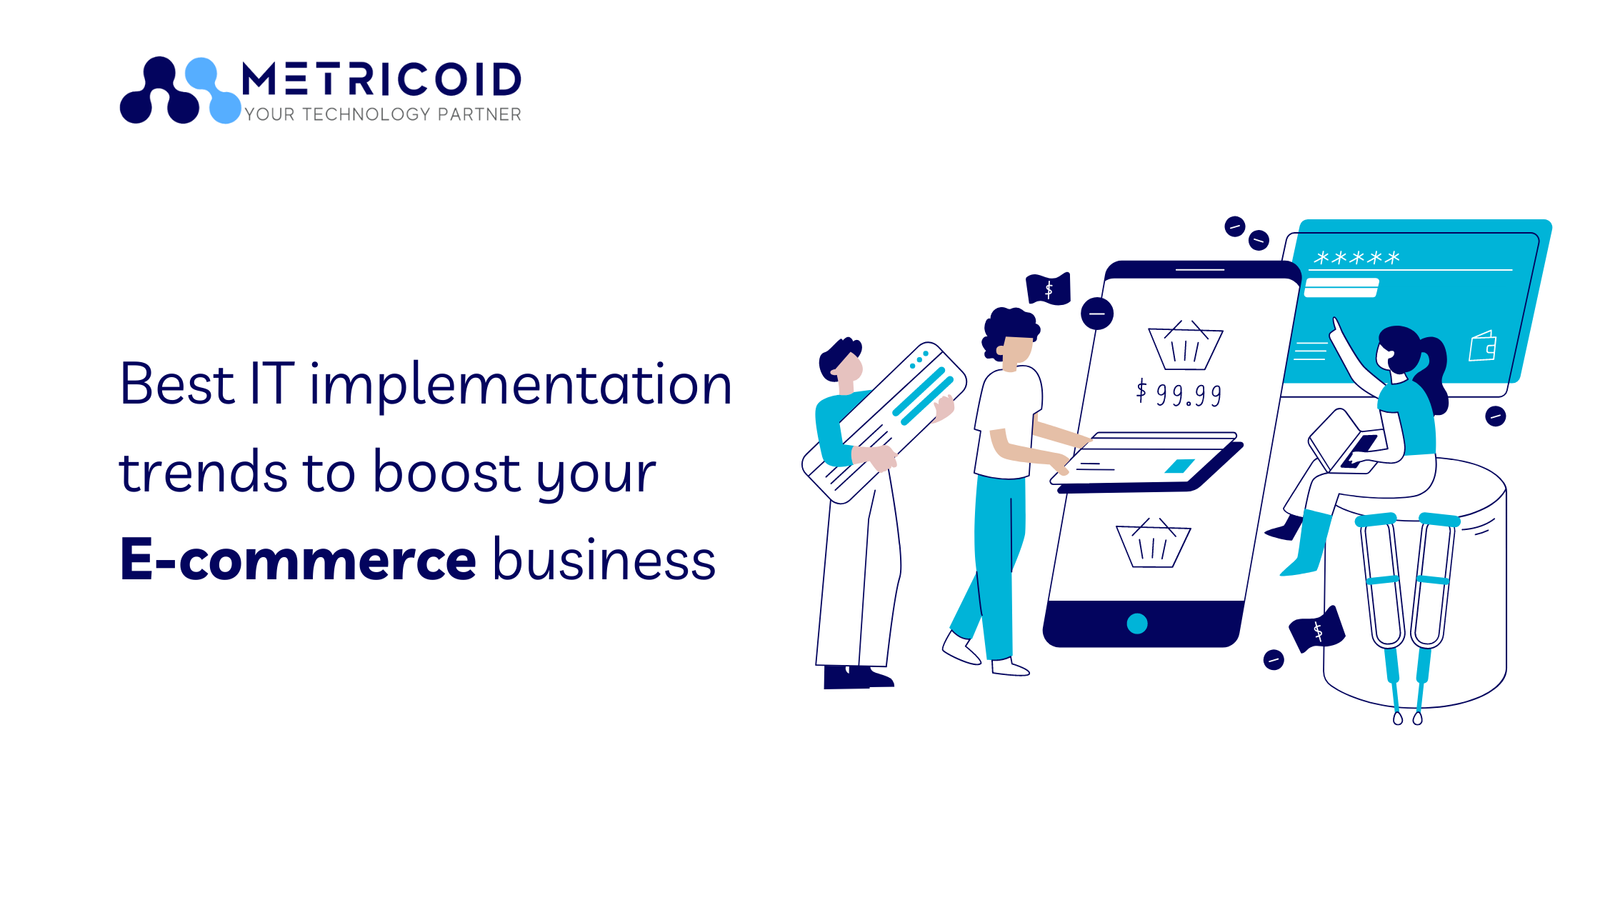 Best IT implementation trends to boost your E-commerce business